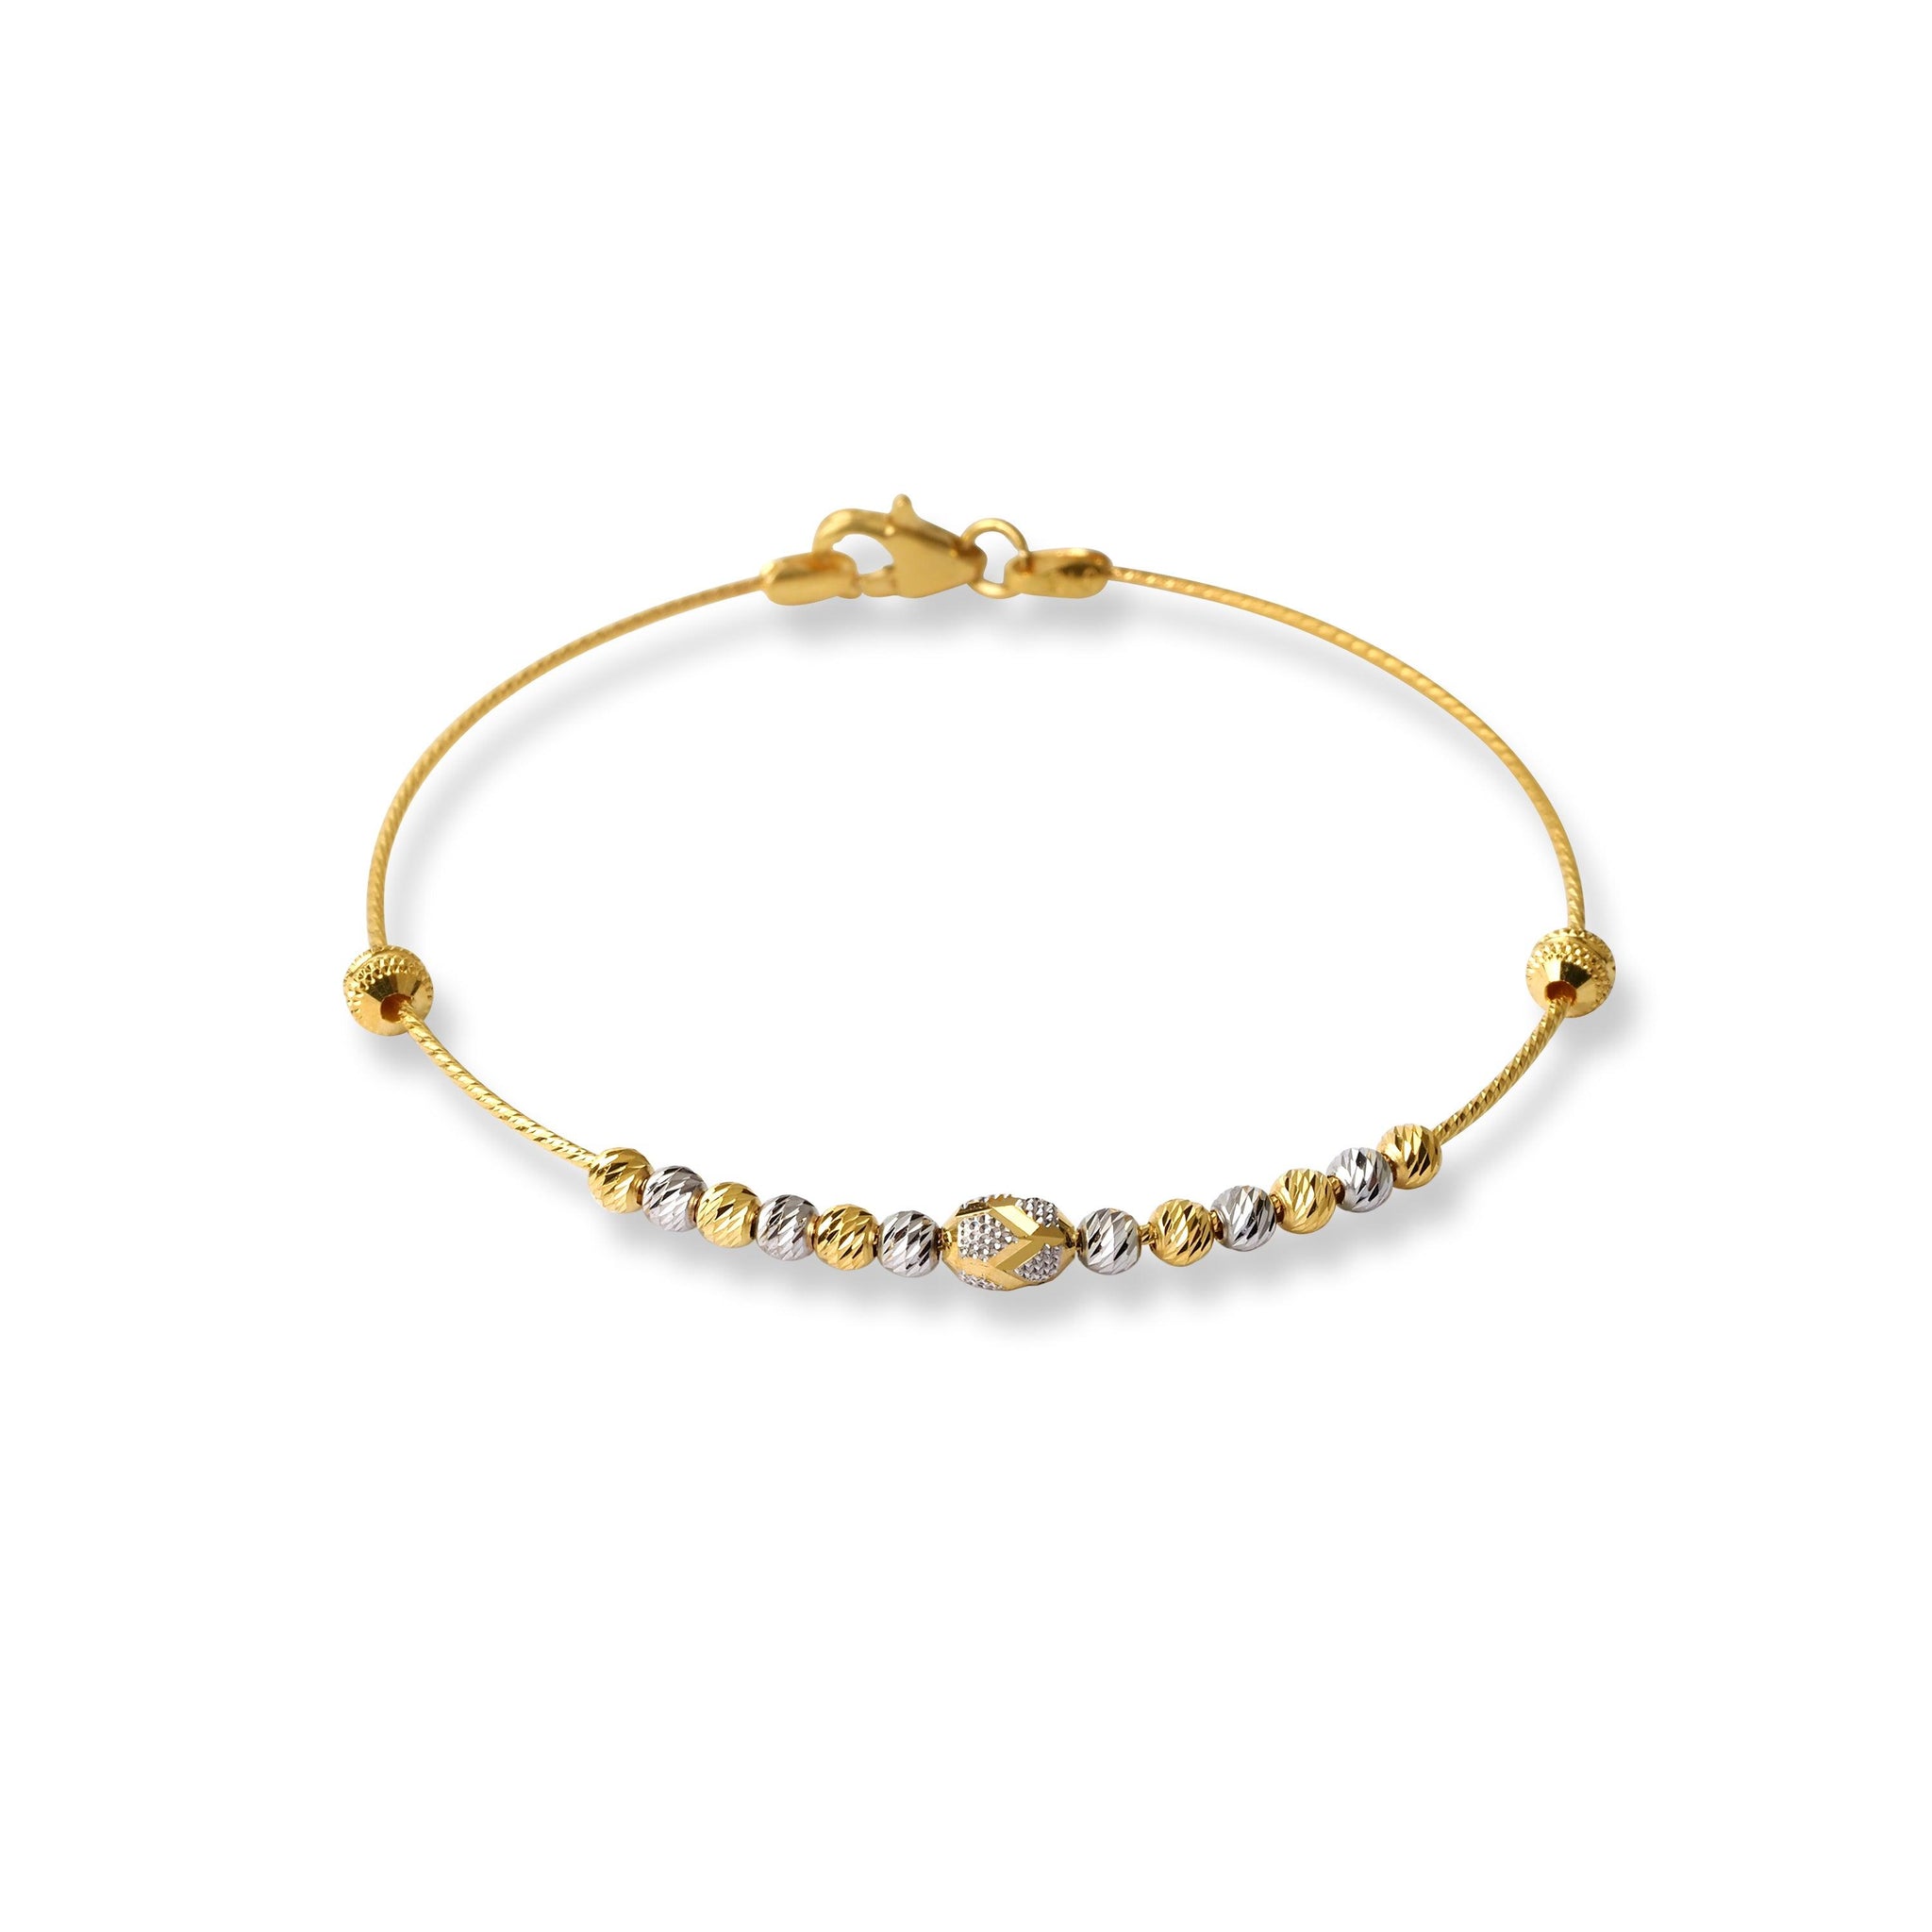 22ct Gold Rhodium Plated Beads Bangle With Rounded Trigger Clasp (4.4g) B-8533